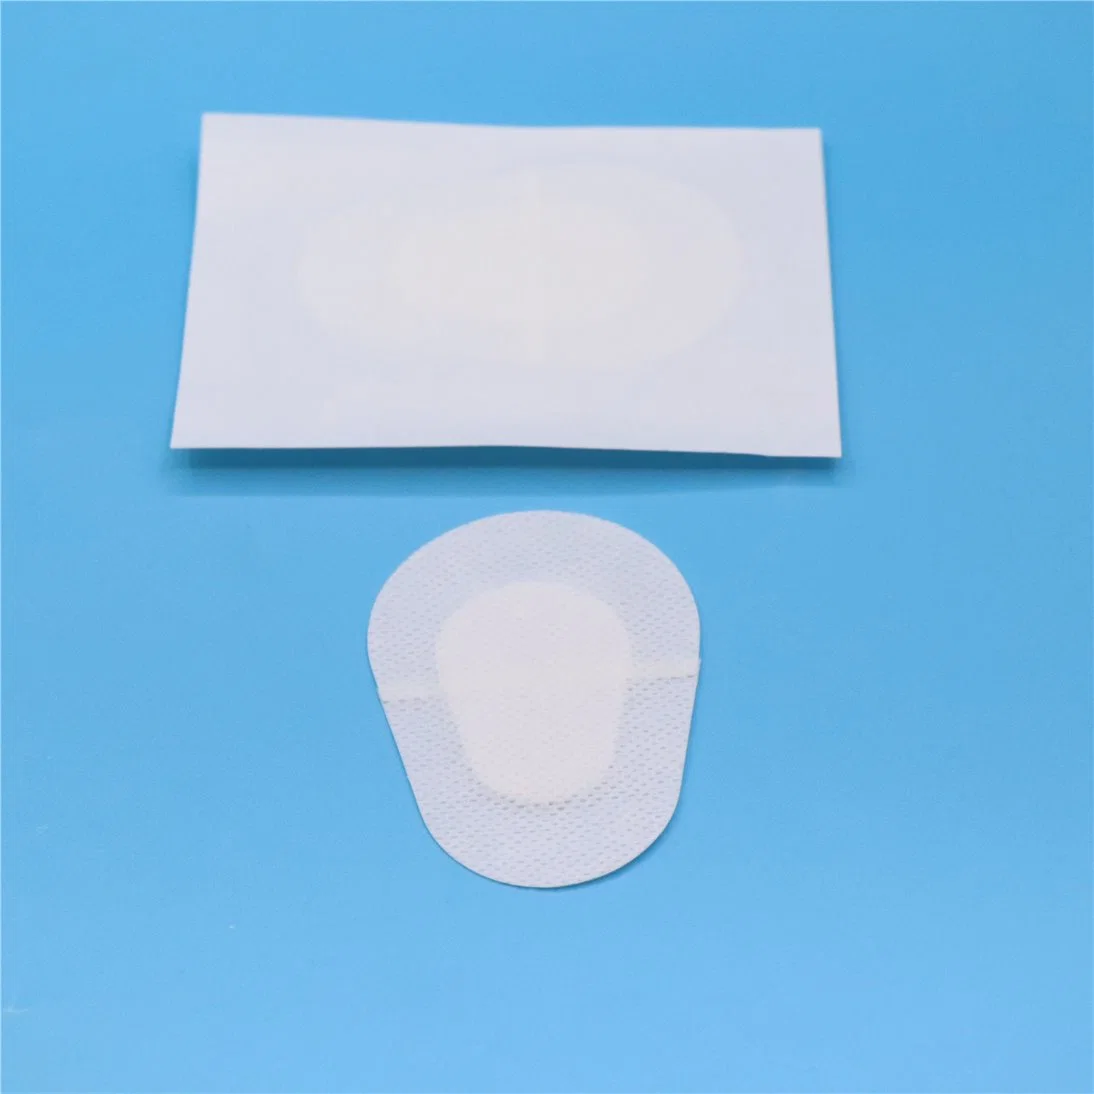 Adhesive Ocular Medical First Aid Wound Dressing Sterile Eye Pad